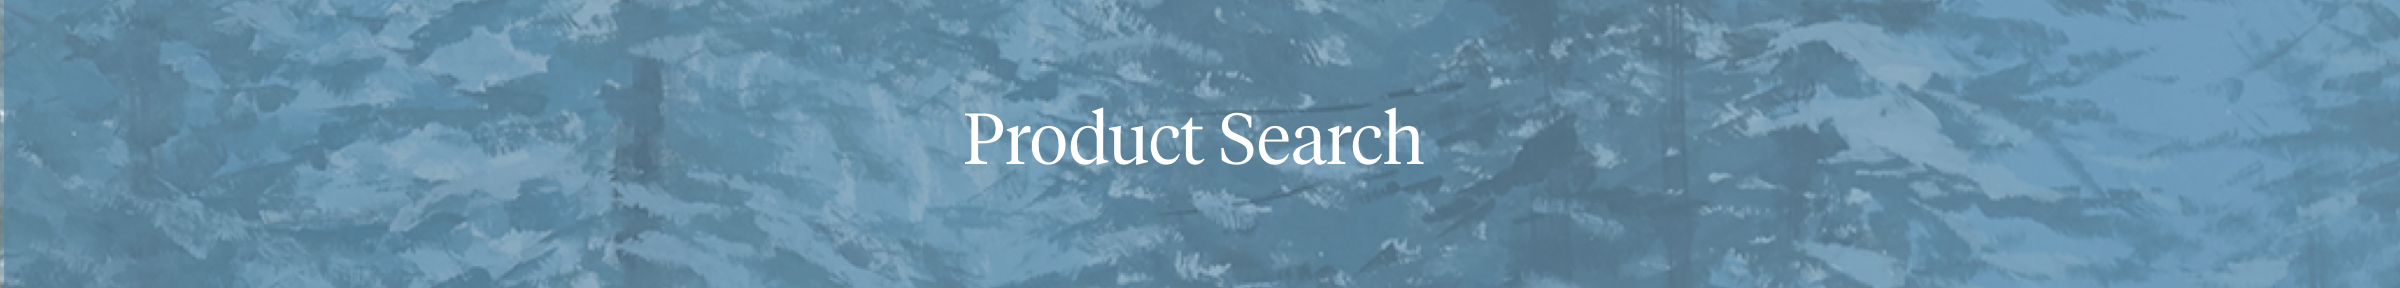 Product Search Results